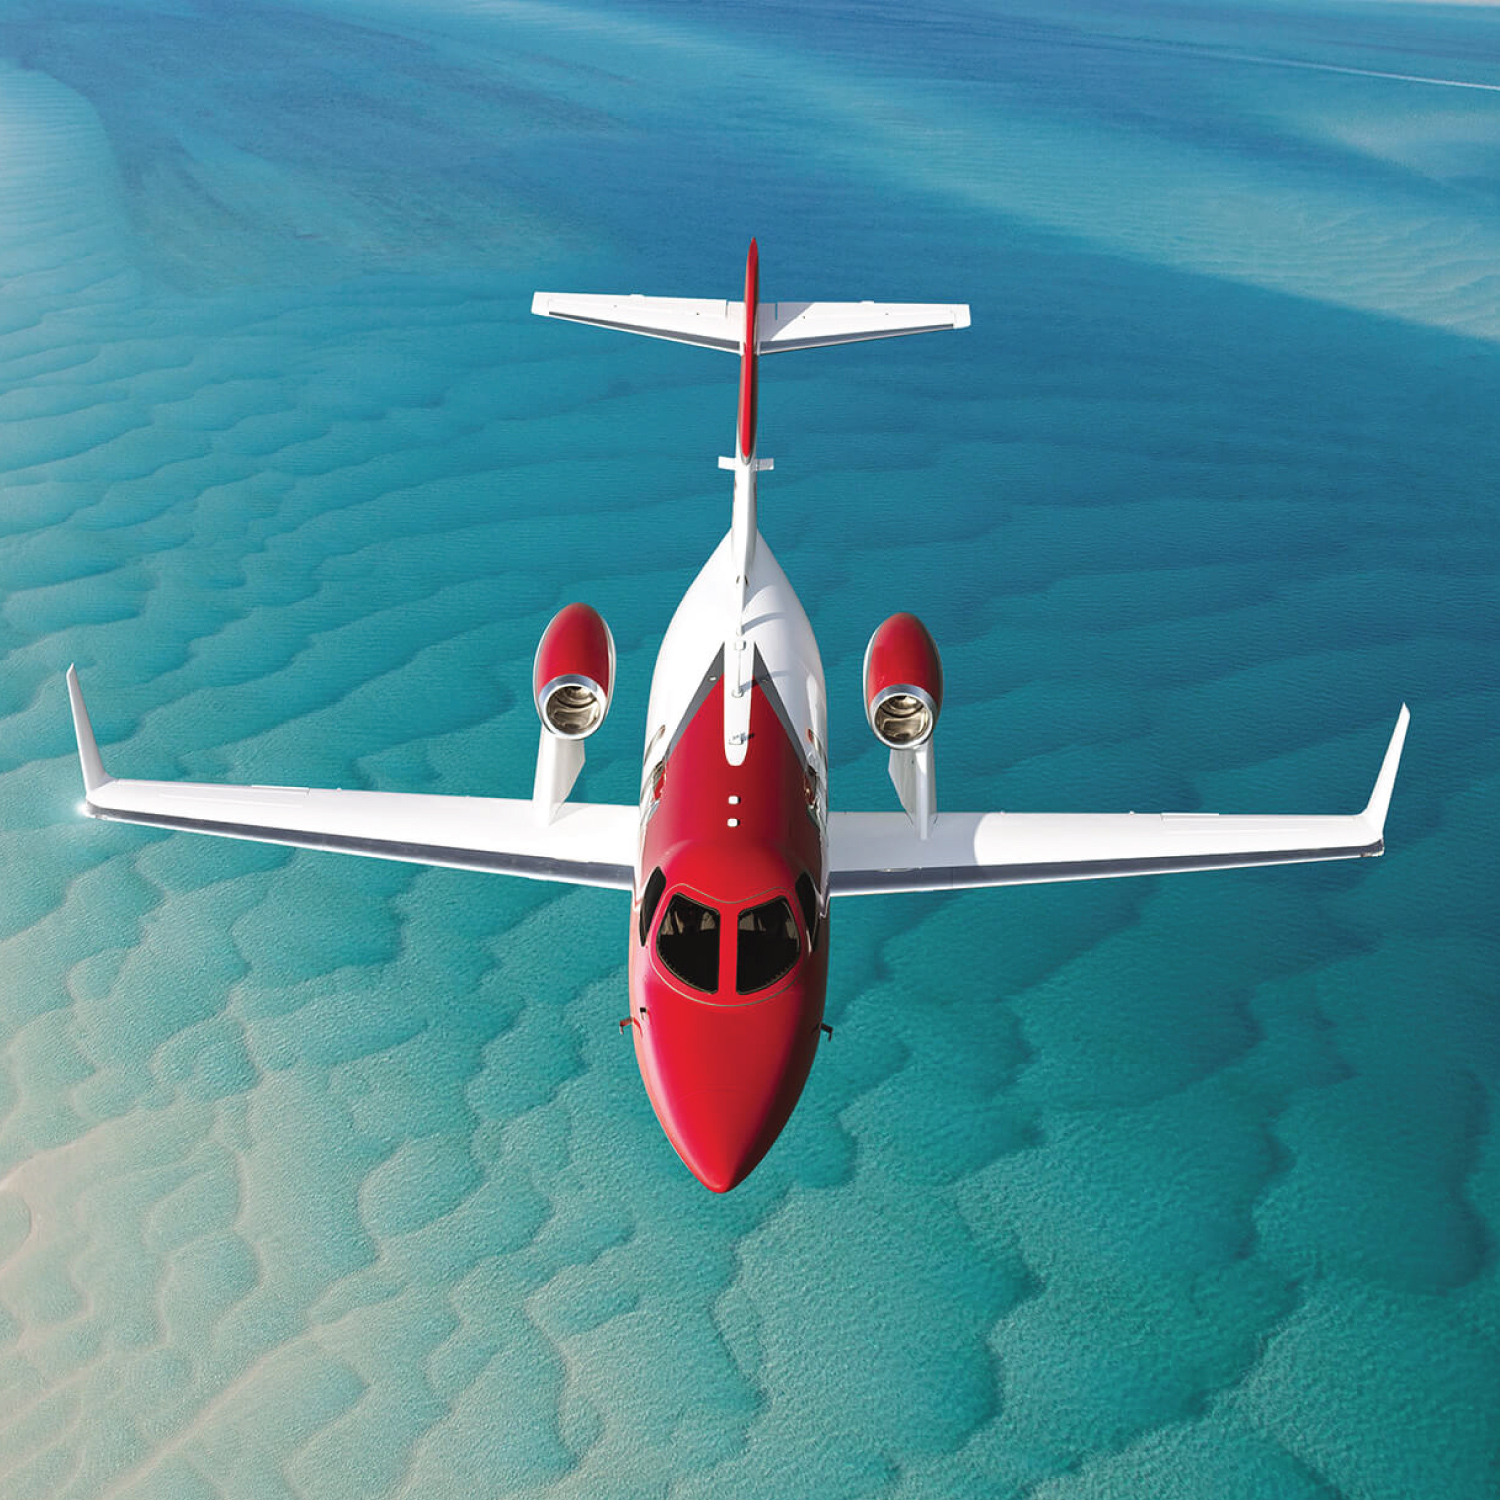 Jetset with Fellow Honda Jet Owners: Unforgettable Caribbean Adventures Await!